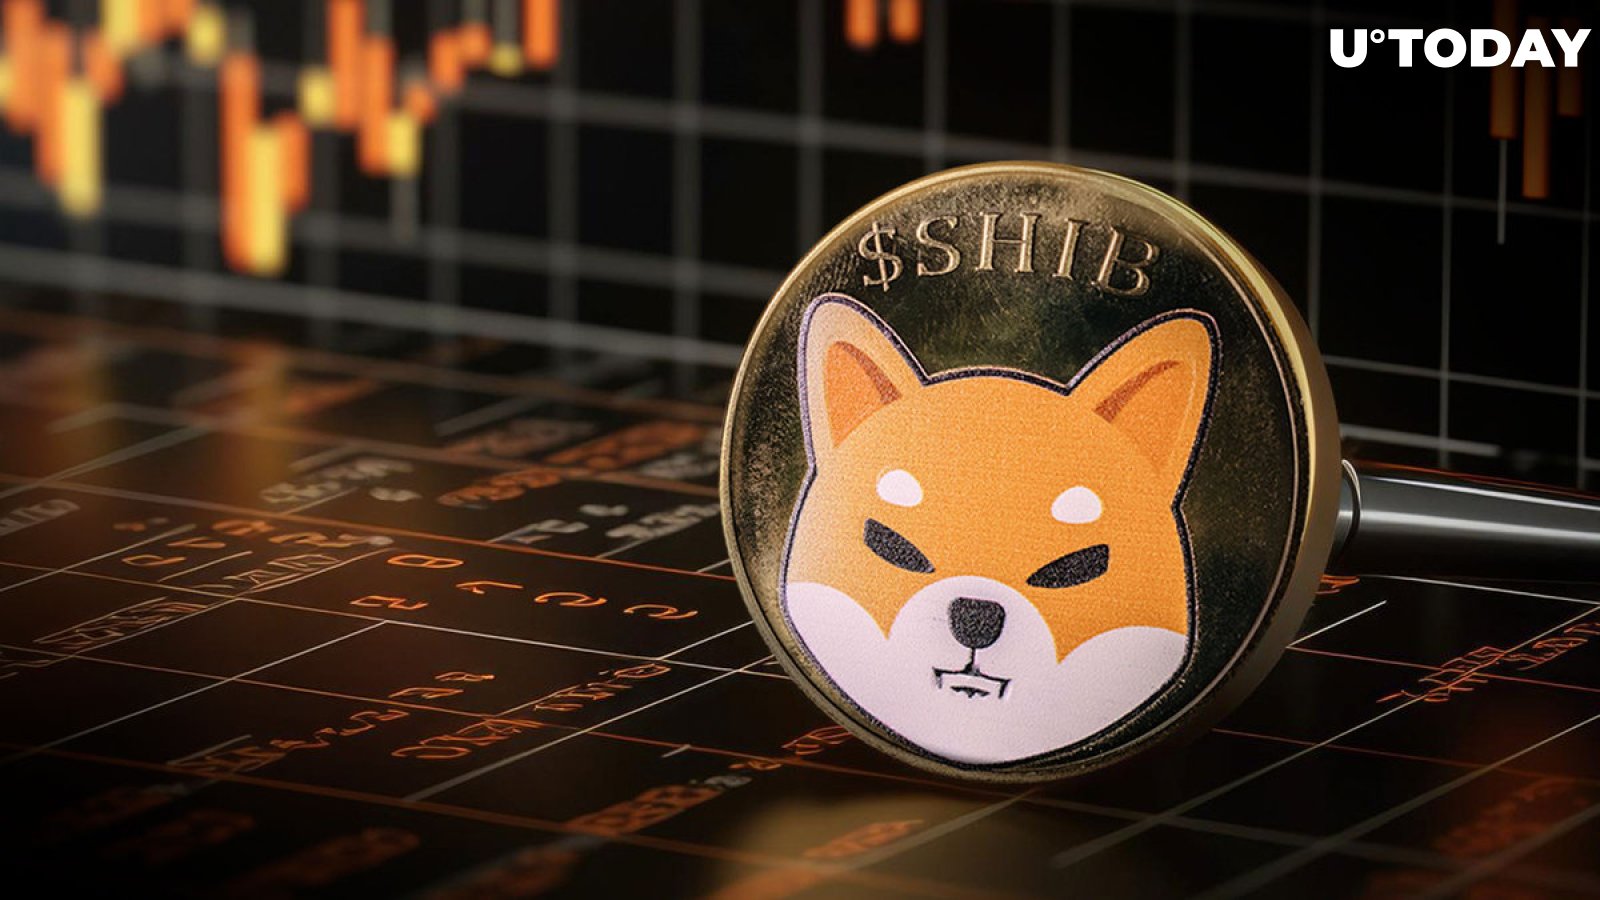 What Can Push Shiba Inu (SHIB) Away From Top 20 Coins?